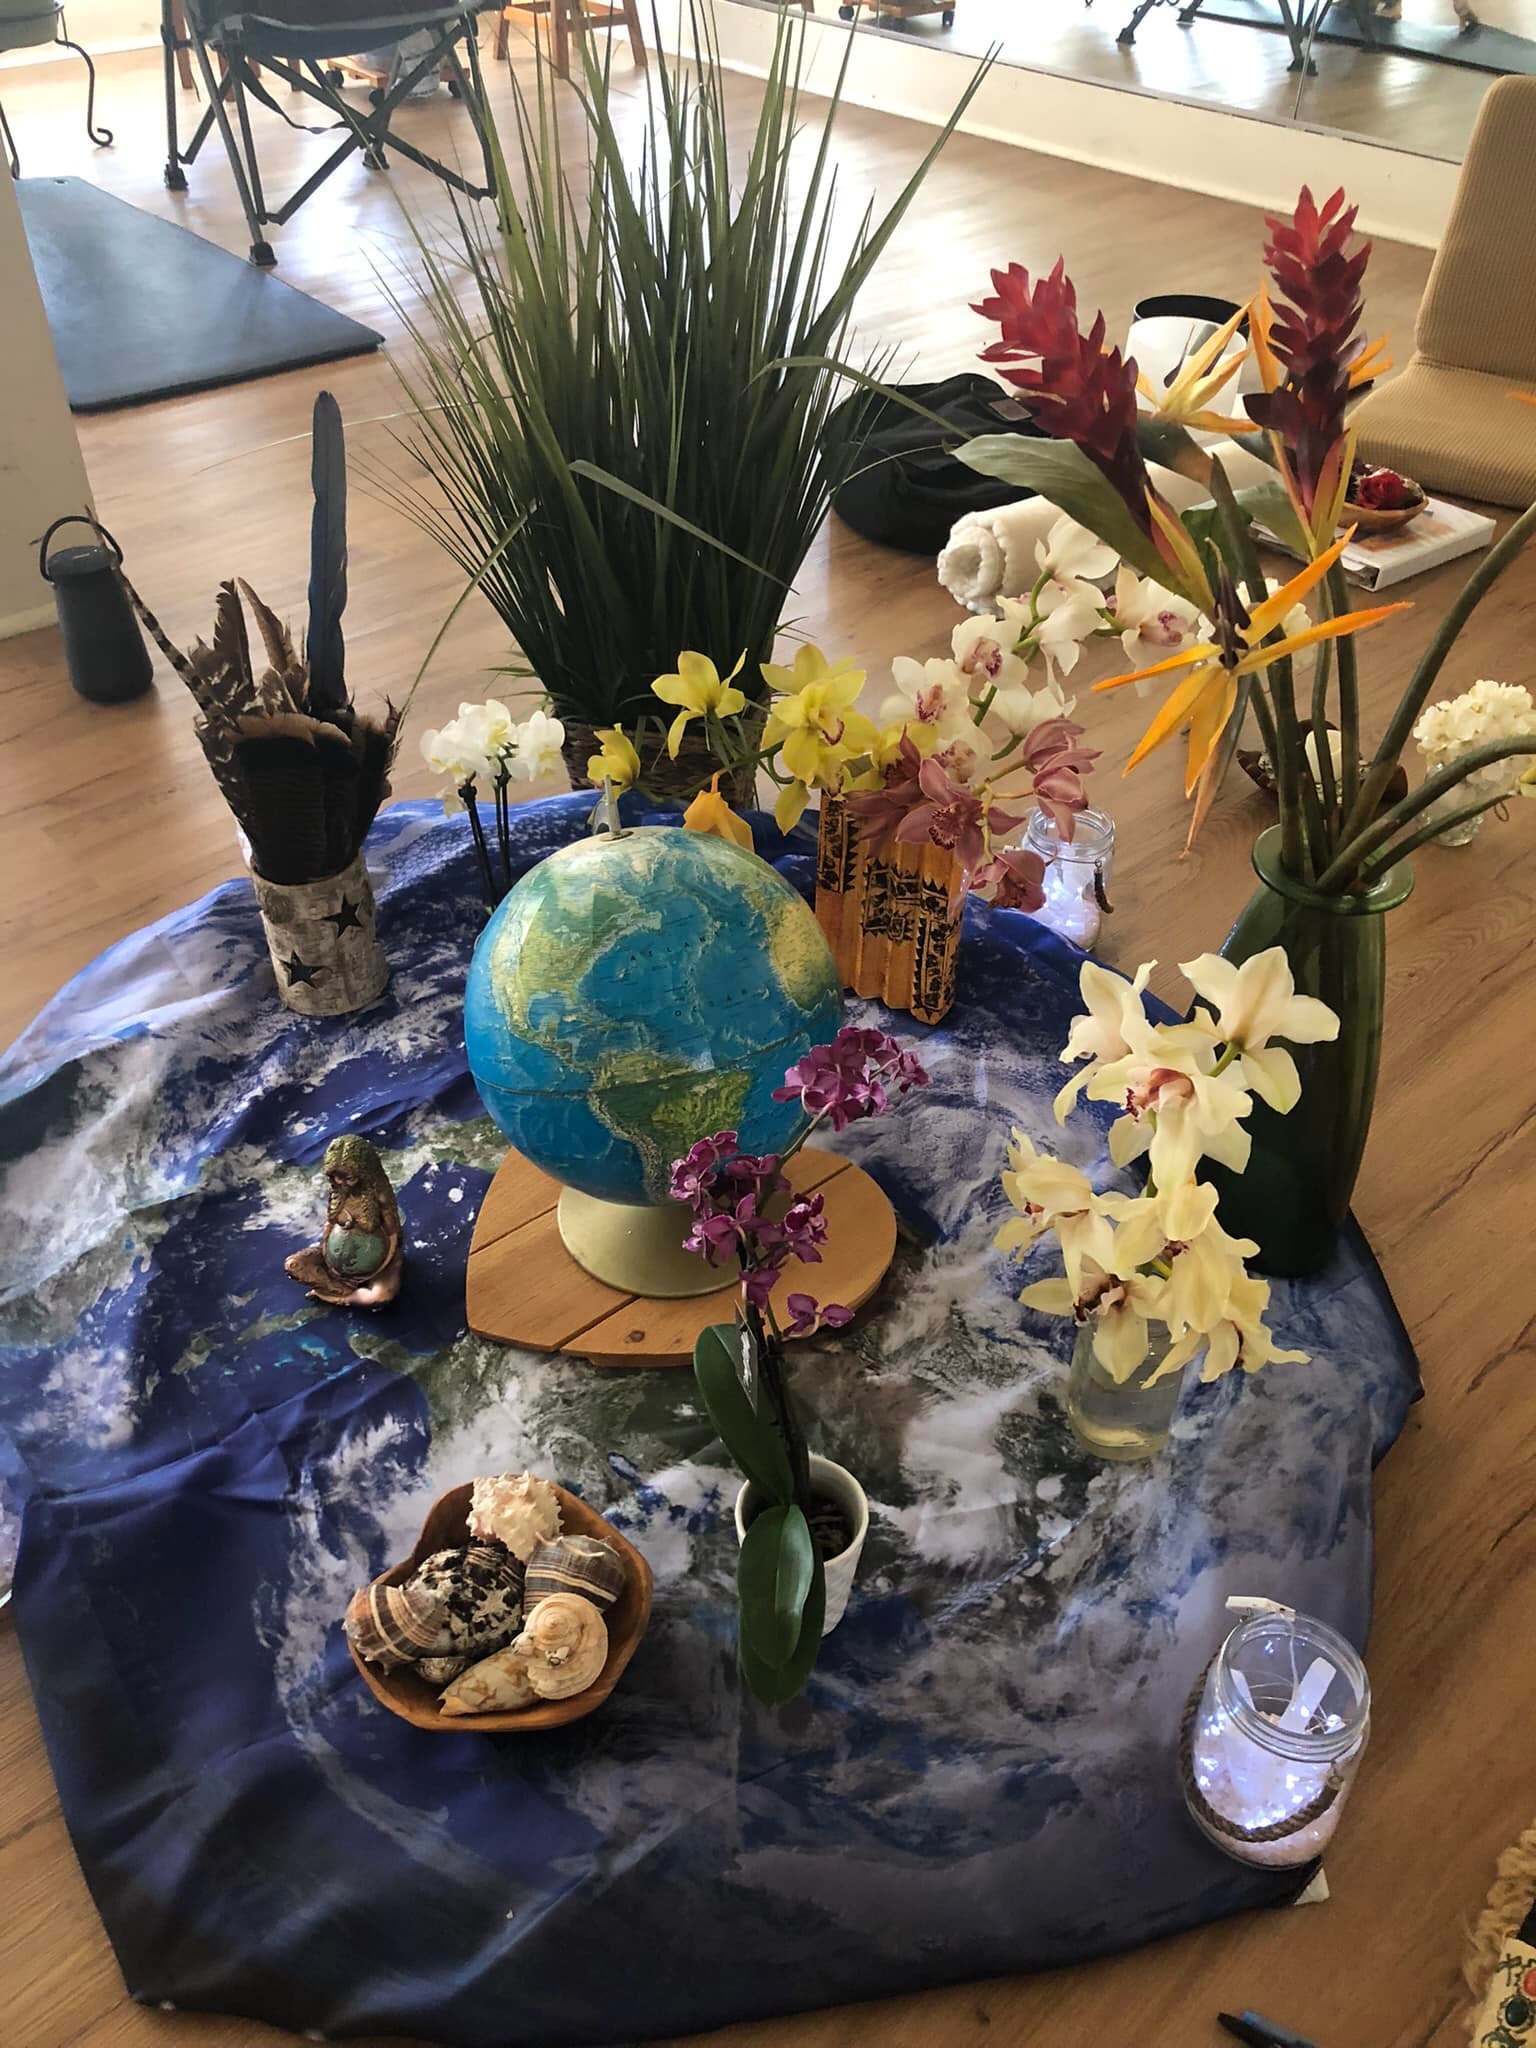 In past posts, I&rsquo;ve discussed the significance of our Warrior circle altars and yesterday it was only fitting that we paid homage to &ldquo;Mother&rdquo;. Our Earth, Mother Gaia, Mama Cacao, the love &amp; memories of our own Mothers &amp; Moth